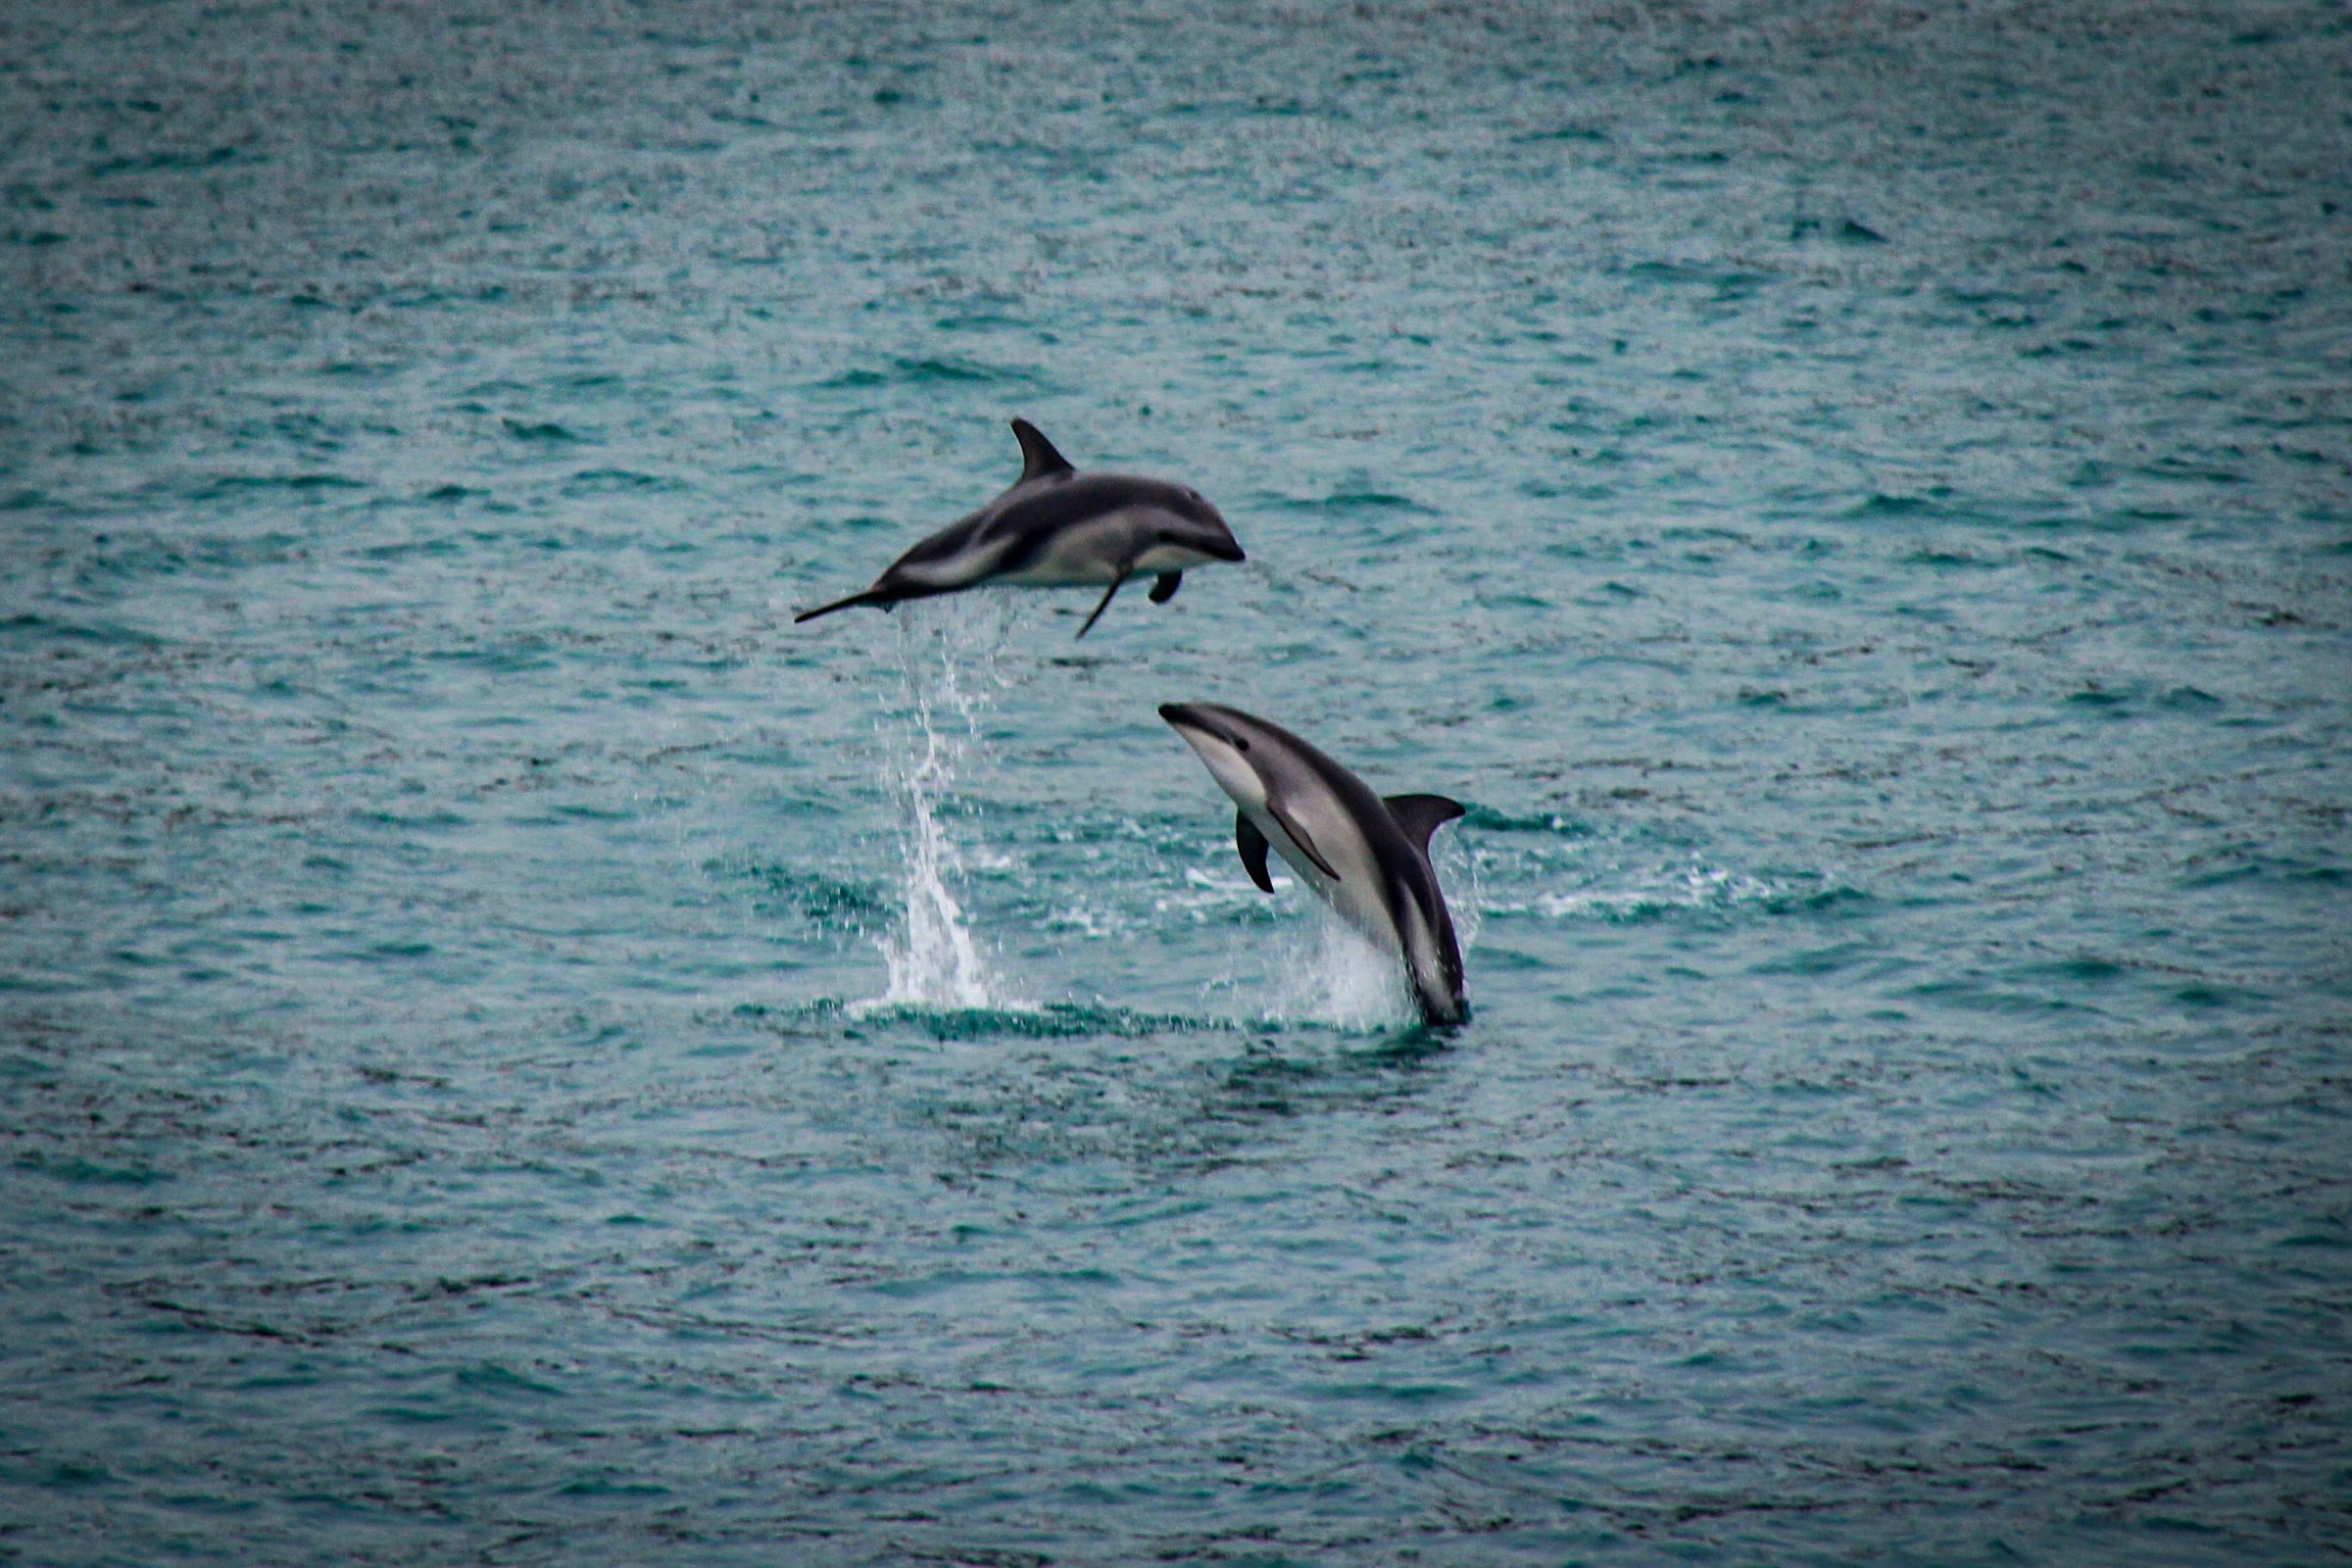 Dusky dolphins playfully jumping out of the water